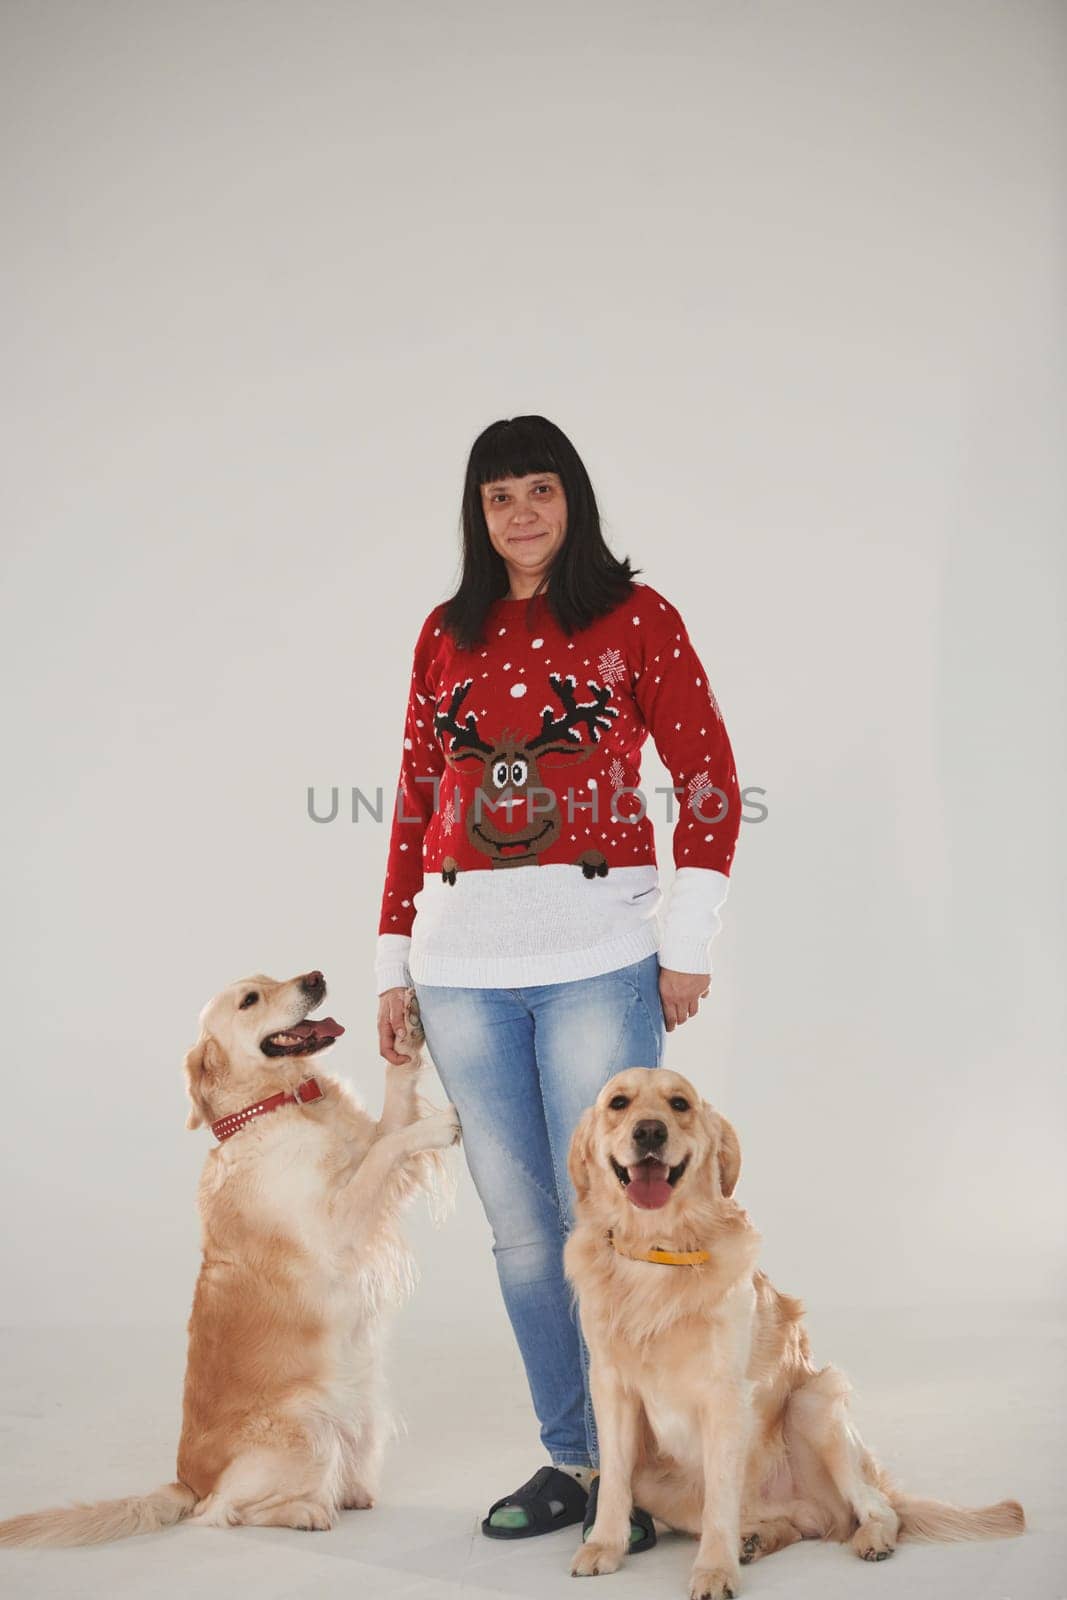 Woman is with her two Golden retrievers in the studio against white background.